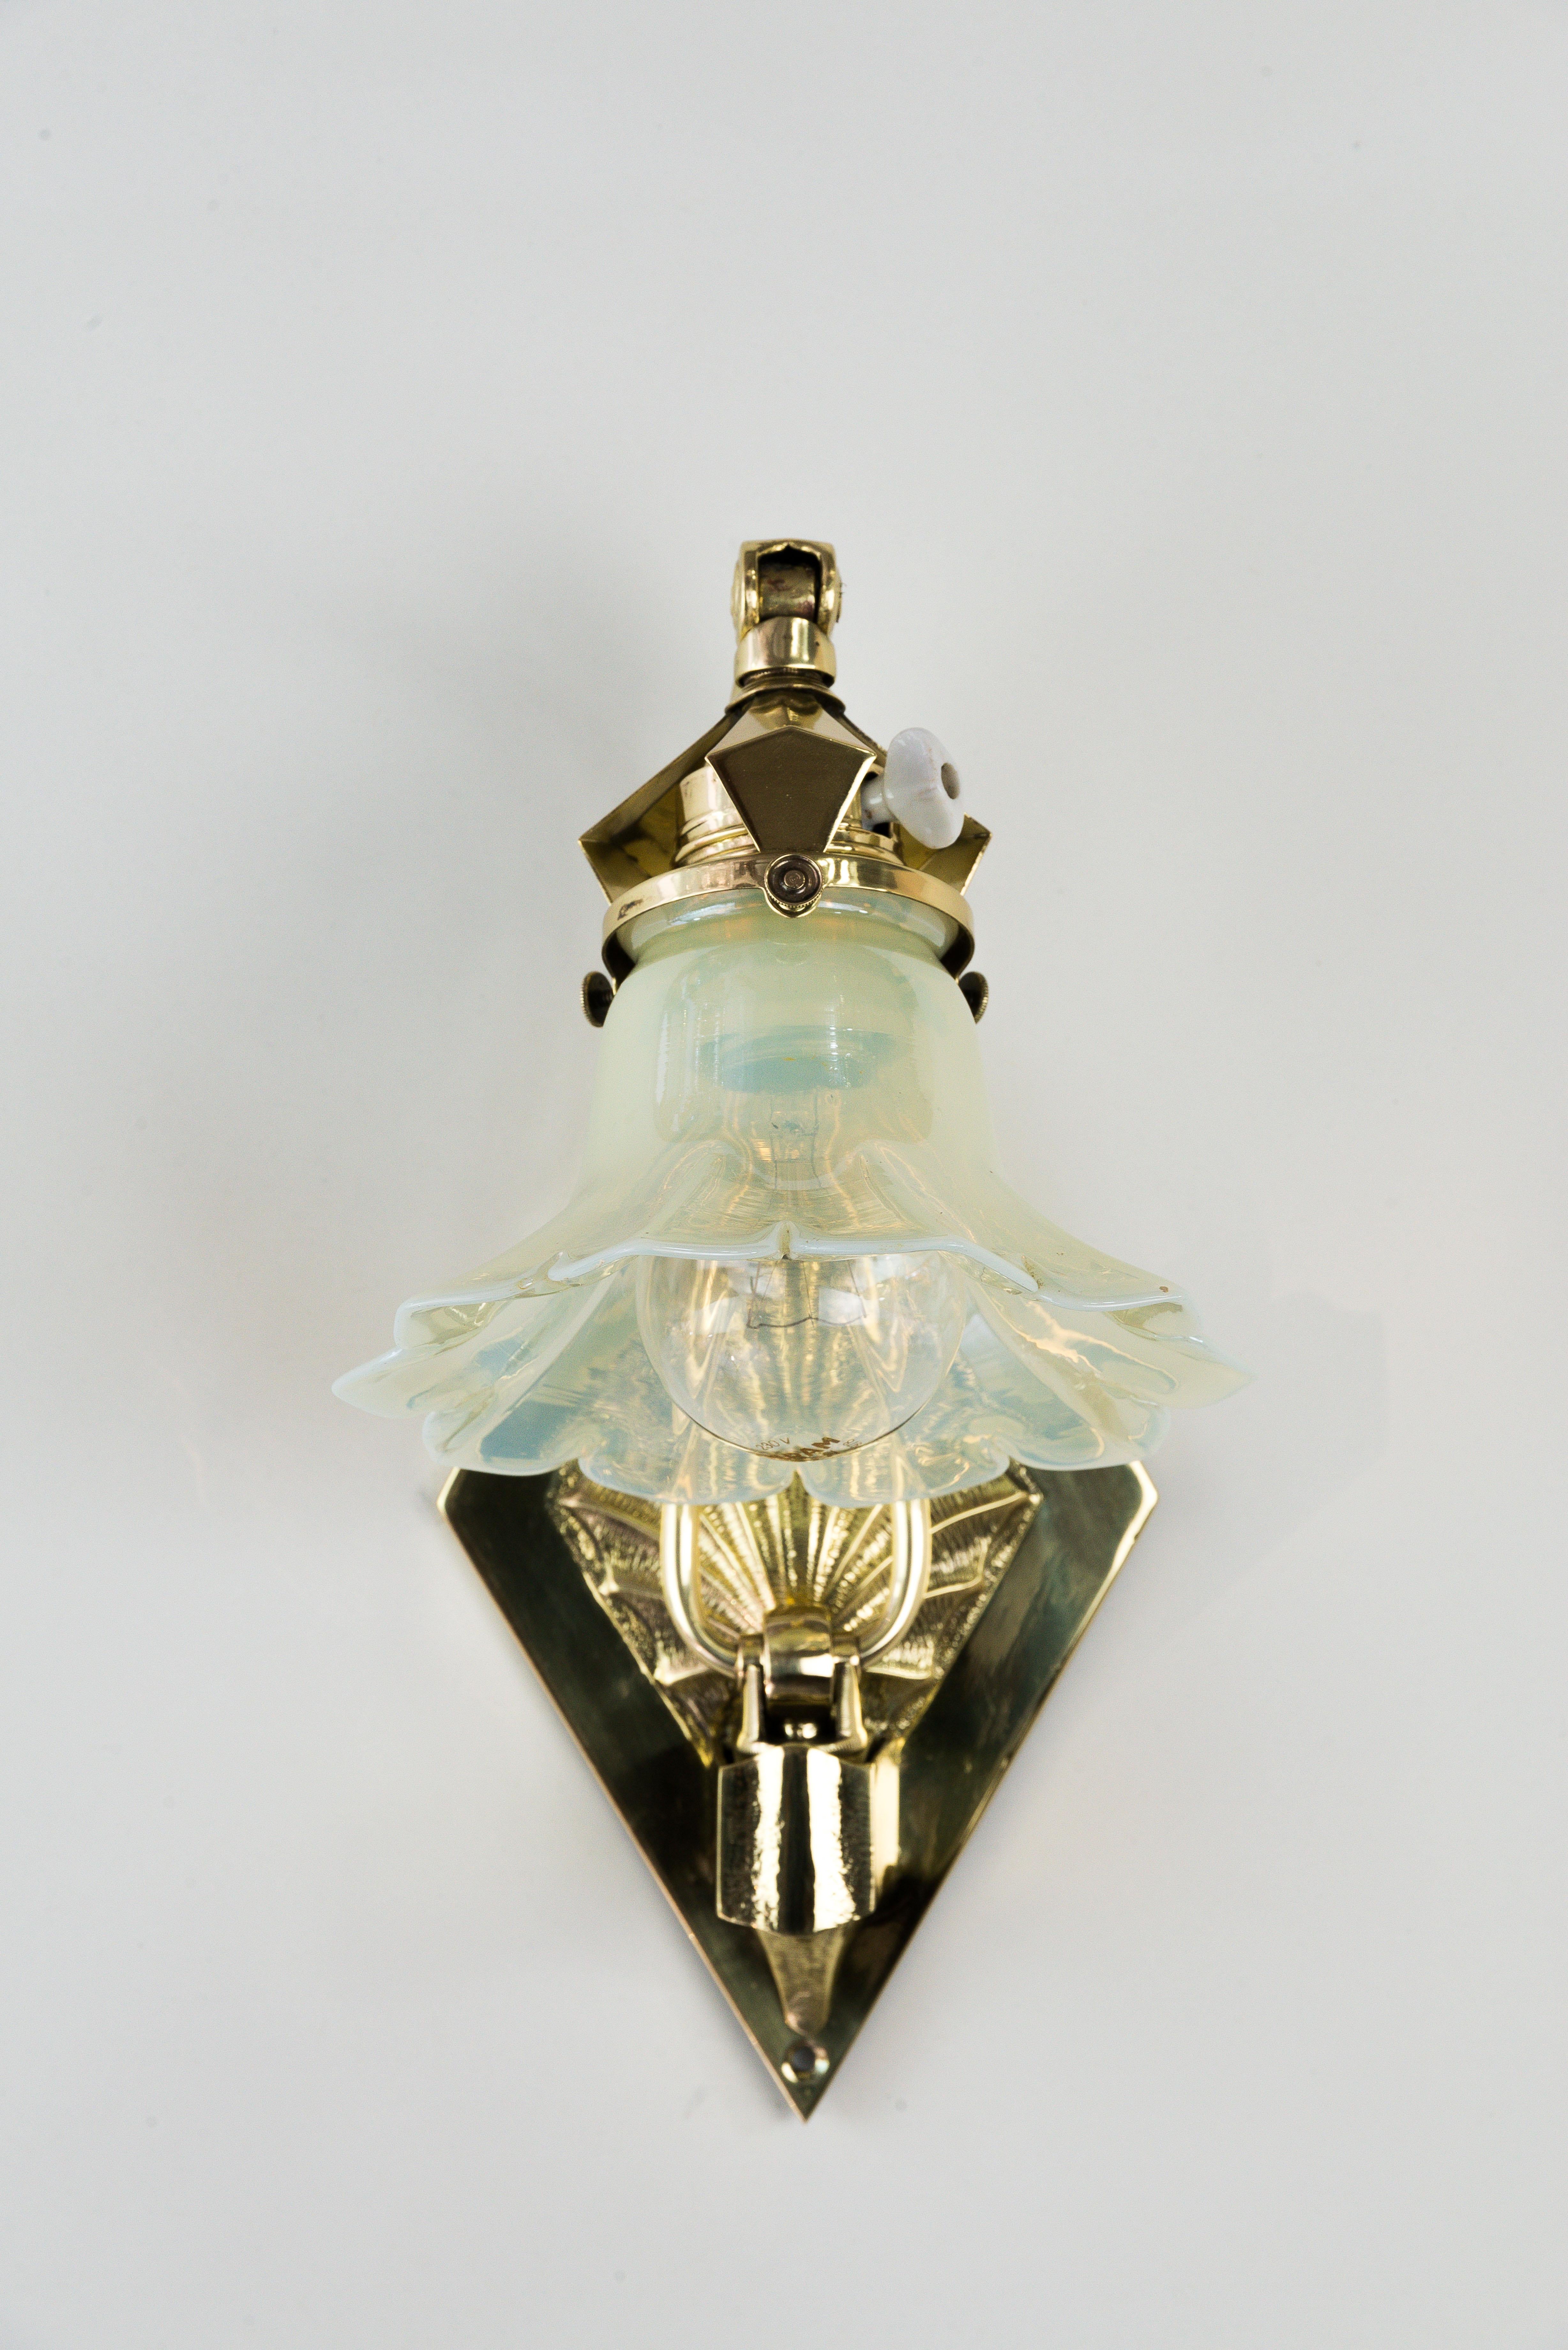 Adjustable Art Deco Wall Lamp circa 1920s with Opaline Glass Shade 4